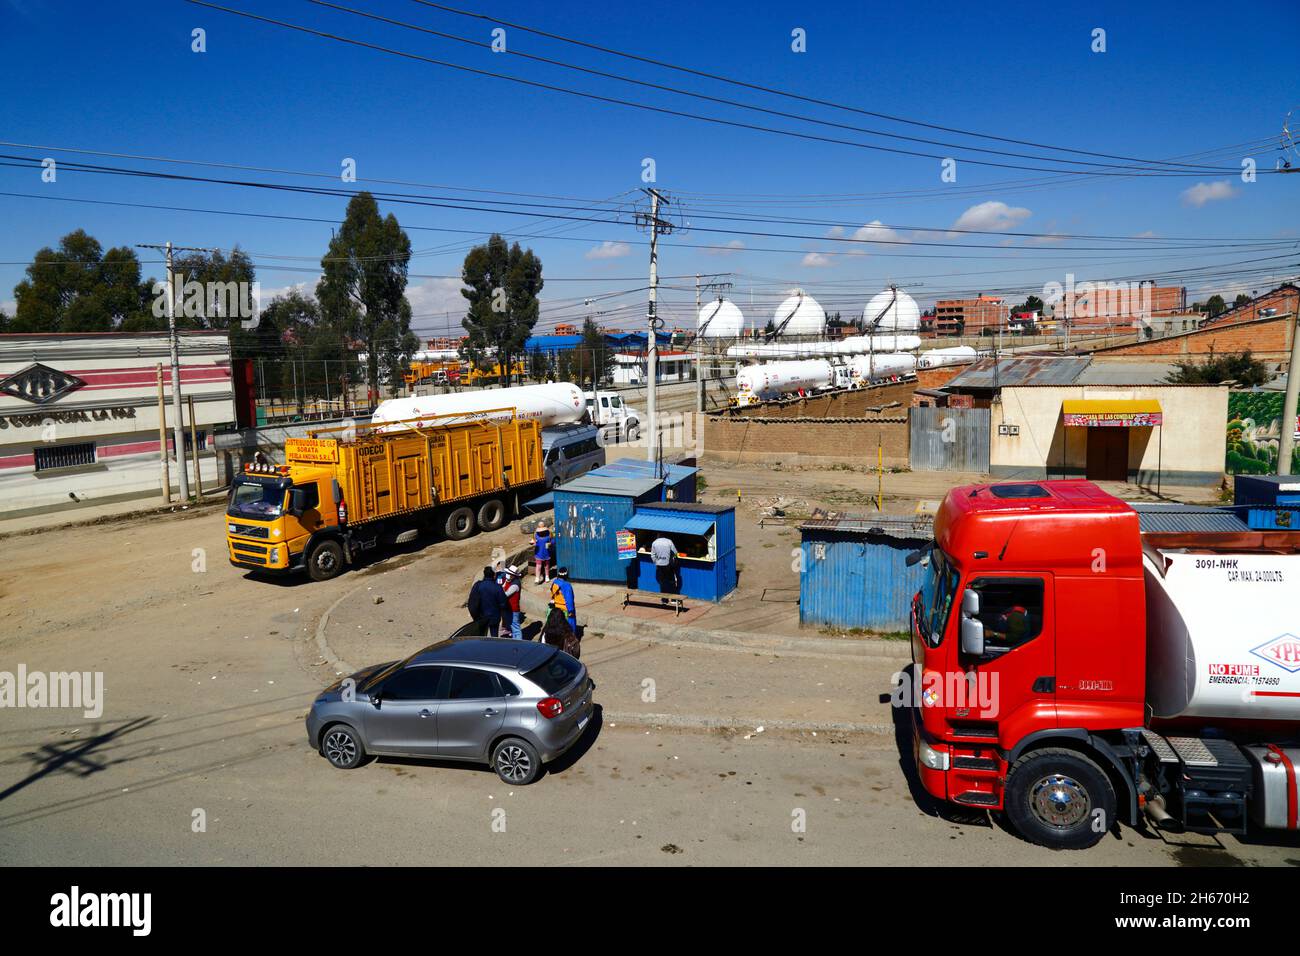 Senkata, El Alto, Bolivia. 13th November 2021. Liquid Natural Gas tank trucks and a domestic bottled gas delivery truck (yellow) outside the Senkata Fuel Plant on Av 6 de Marzo / Camino Oruro in El Alto. Yacimientos Petrolíferos Fiscales Bolivianos (YPFB, Bolivia's state owned oil and gas company) have a large refinery and storage plant here, which supplies La Paz, El Alto and the surrounding area with petrol / gasoline, diesel and liquid natural gas (in bottles for domestic use and also for vehicles and other industries). In the background are some of the spherical gas storage tanks. Stock Photo